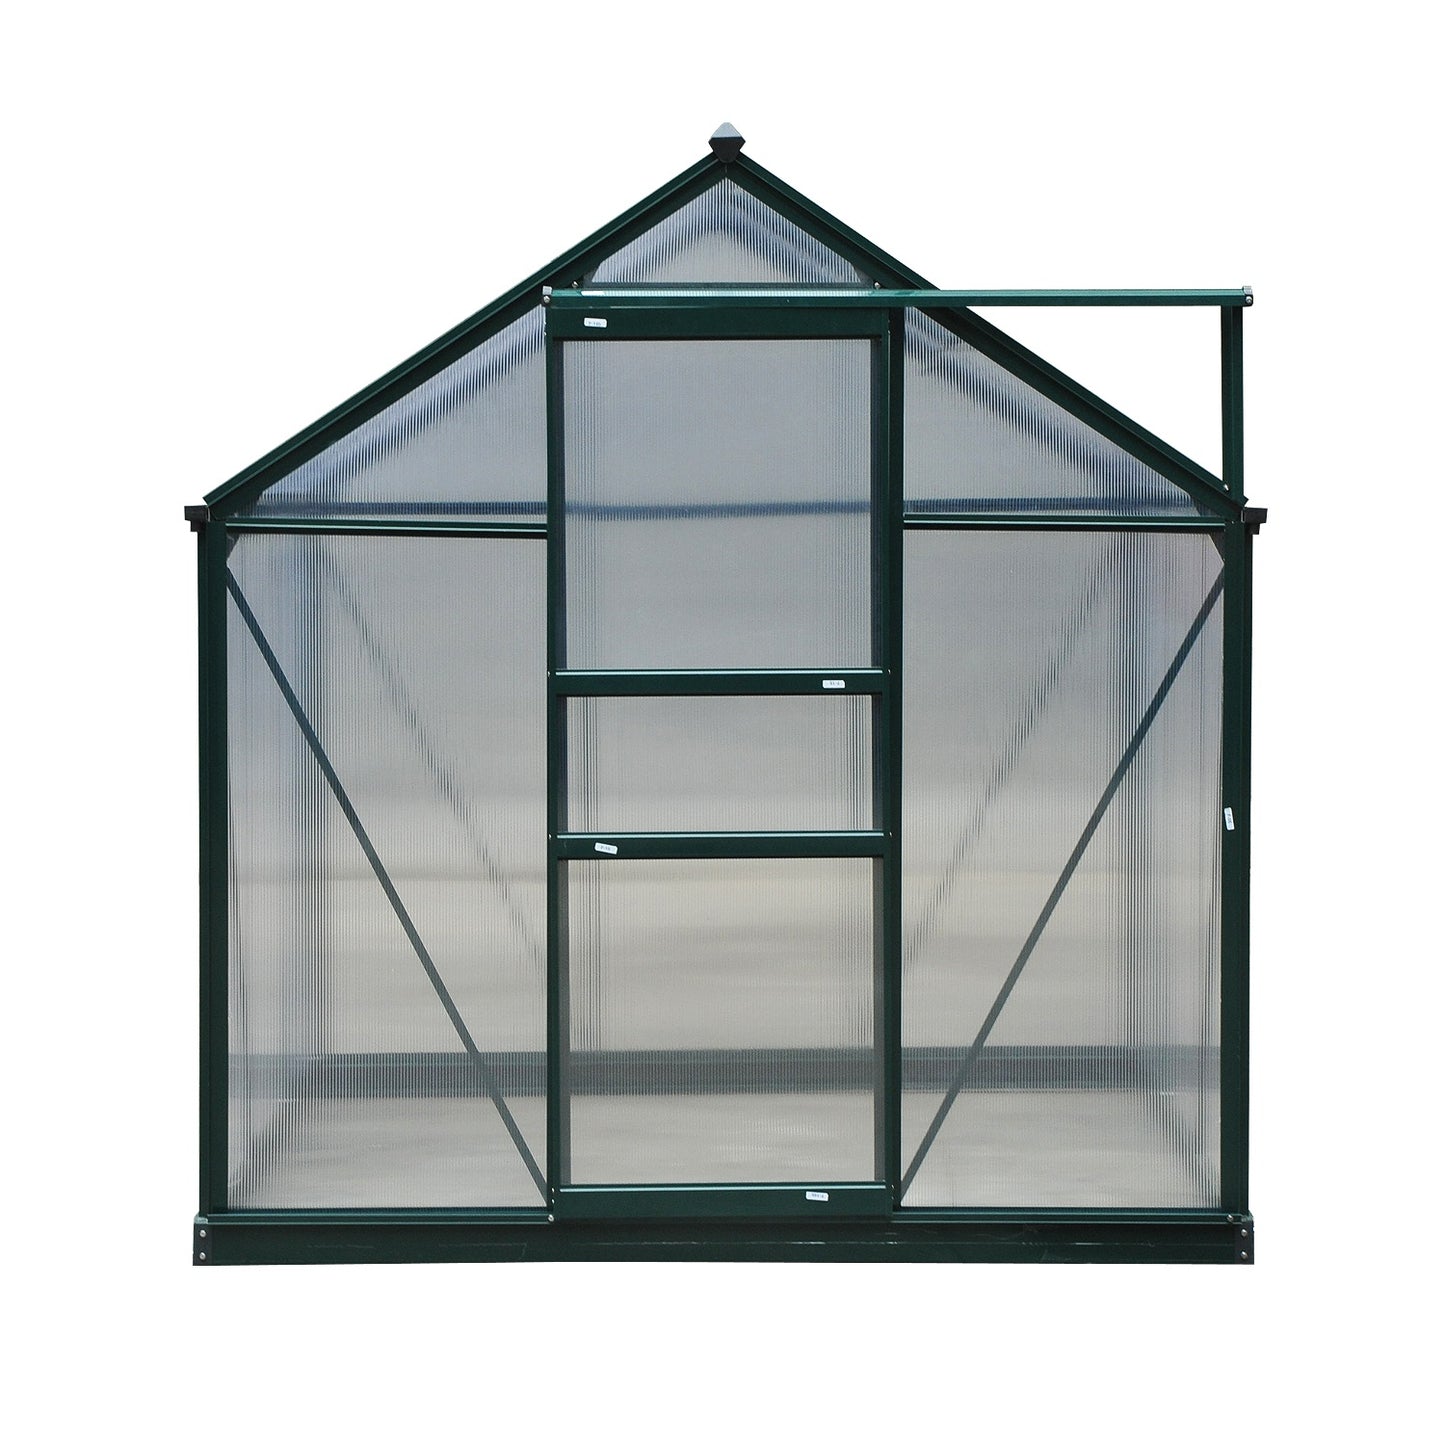 Outsunny Portable Walk-In Greenhouse, 190Lx252Wx201H cm, Aluminum-Dark Green Frame